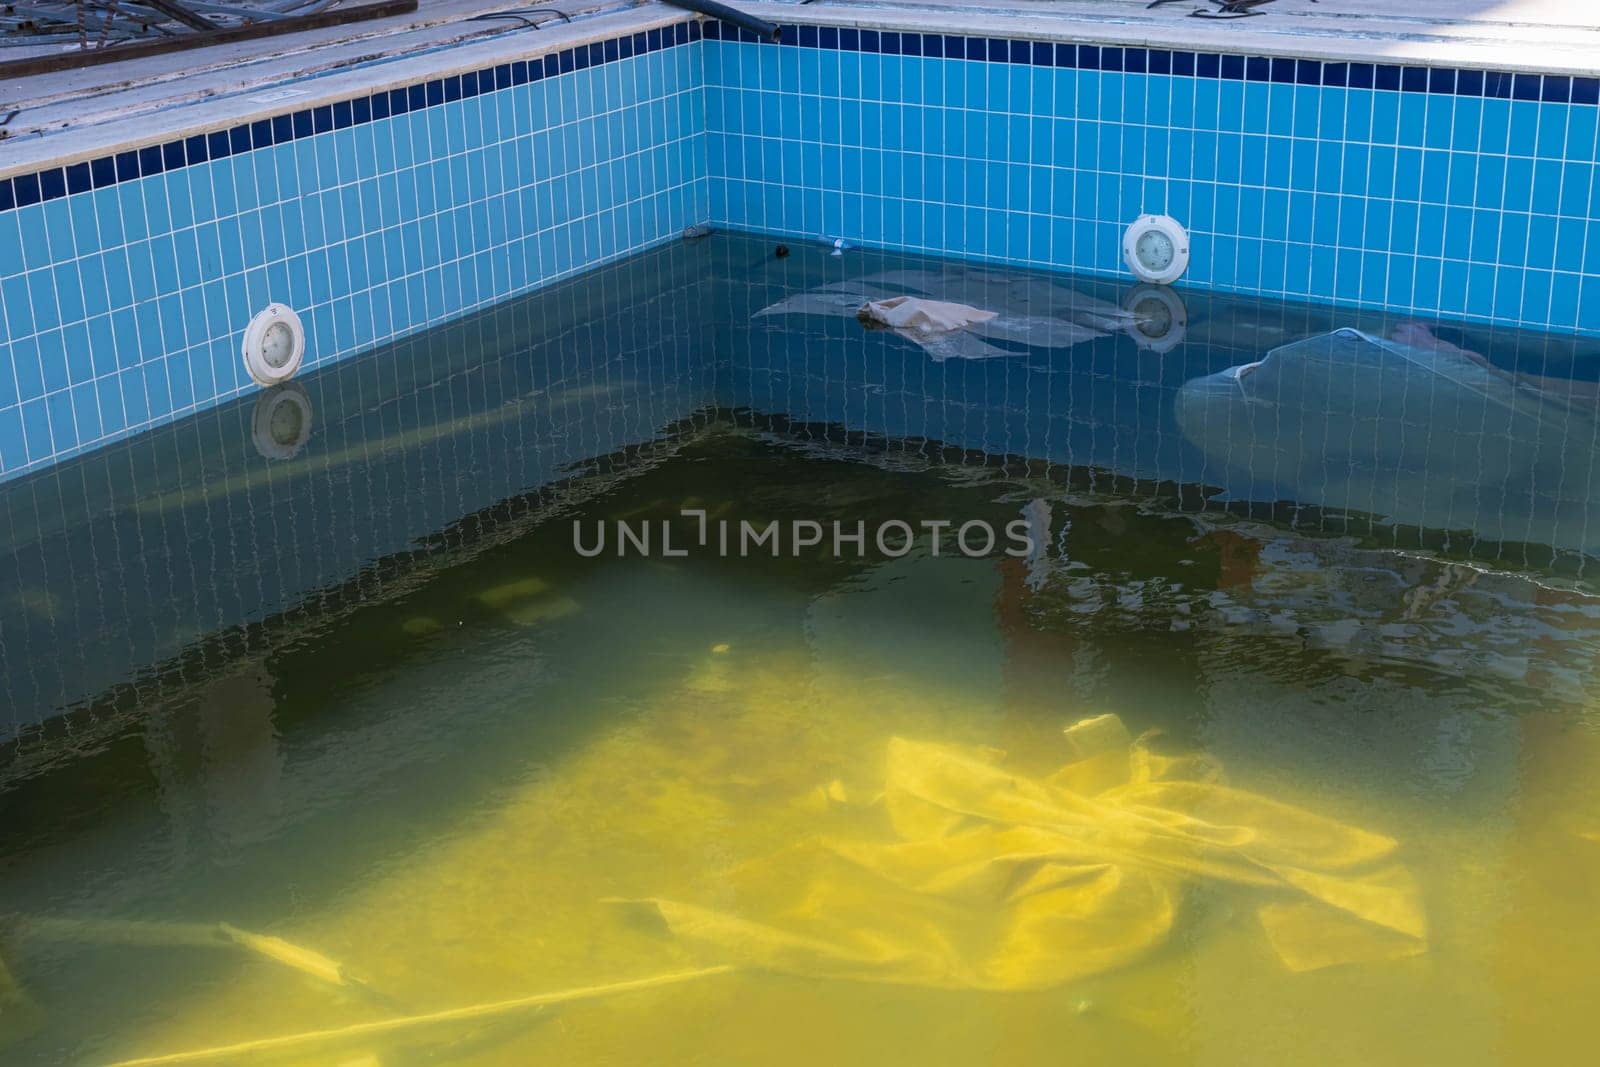 outdoor pool repair,dirty water,outdoor pool cleaning after winter. High quality photo